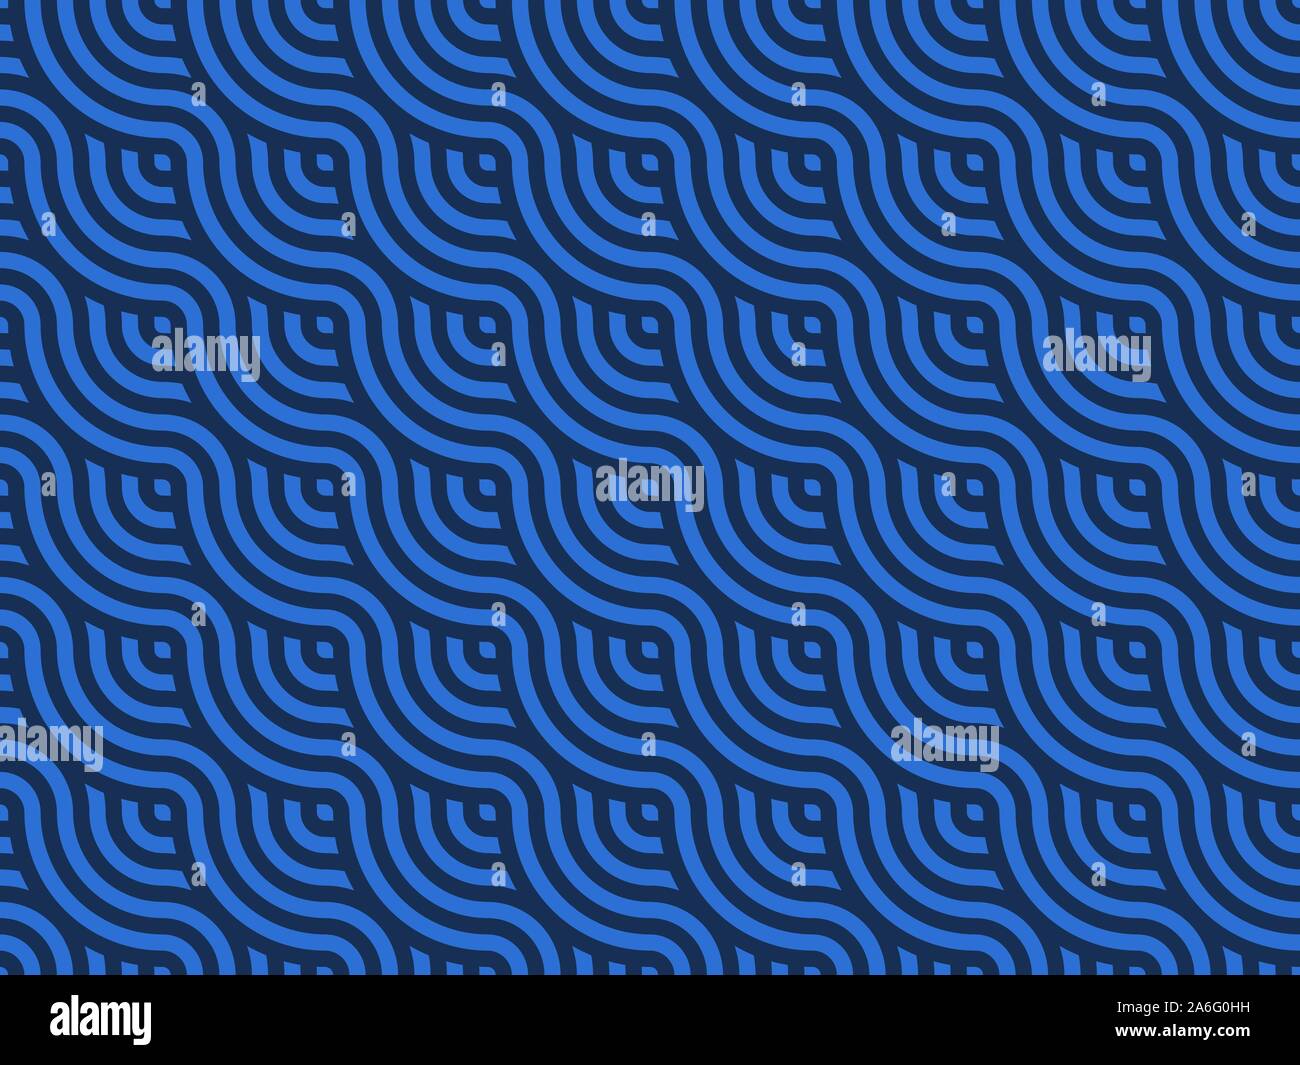 Blue wavy lines seamless pattern. Japanese style striped curly texture. Traditional abstract geometric pattern tiles. Overlapping repeating circles Stock Vector